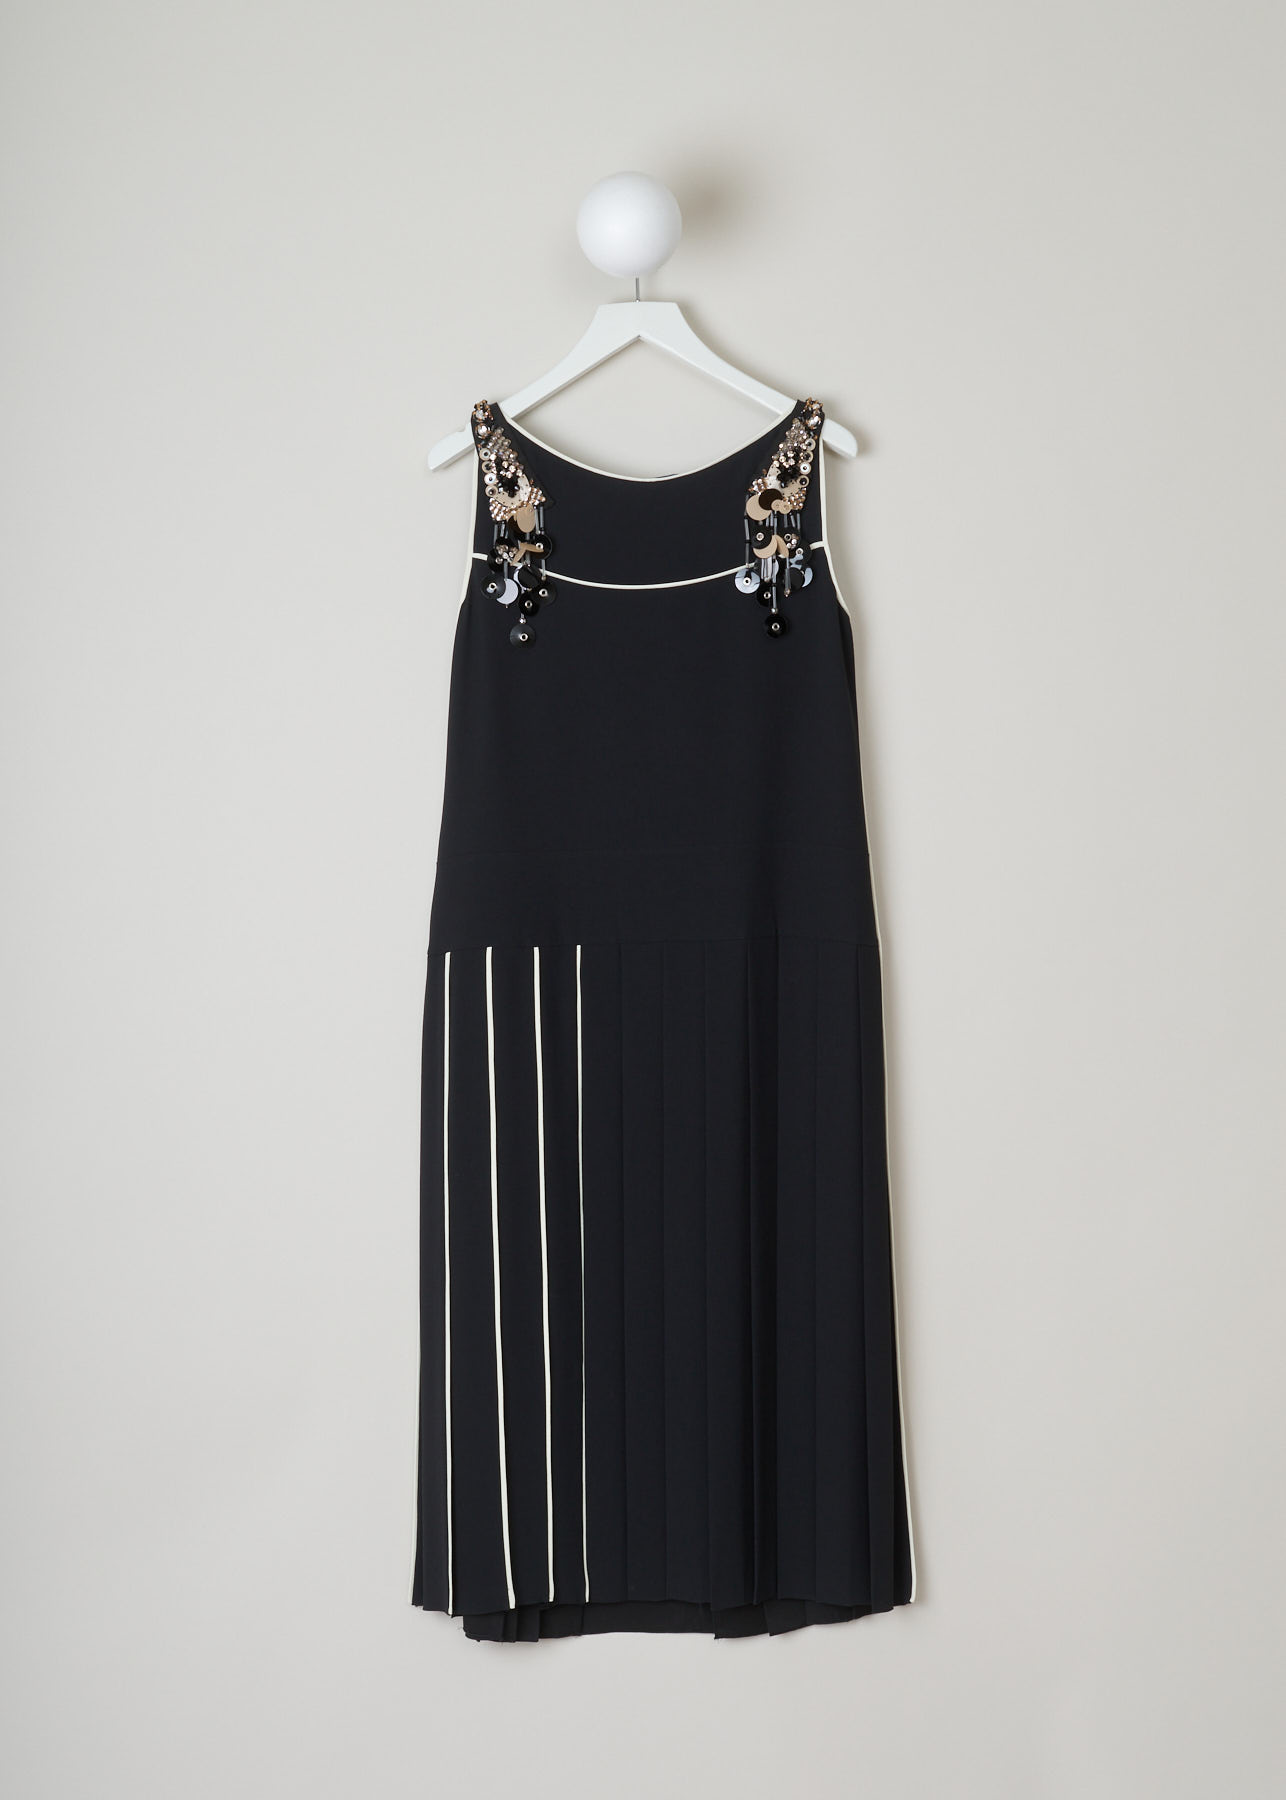 Prada, black beaded and sequined dress, SablePipingR_P33F7R_F0SJ2_NeroAvorioGRI, black, back, black dress trimmed in white. beautiful beads,crystals and sequins on the shoulder. concealed zipper on the left side of the dress. pleated skirt which flares out. 